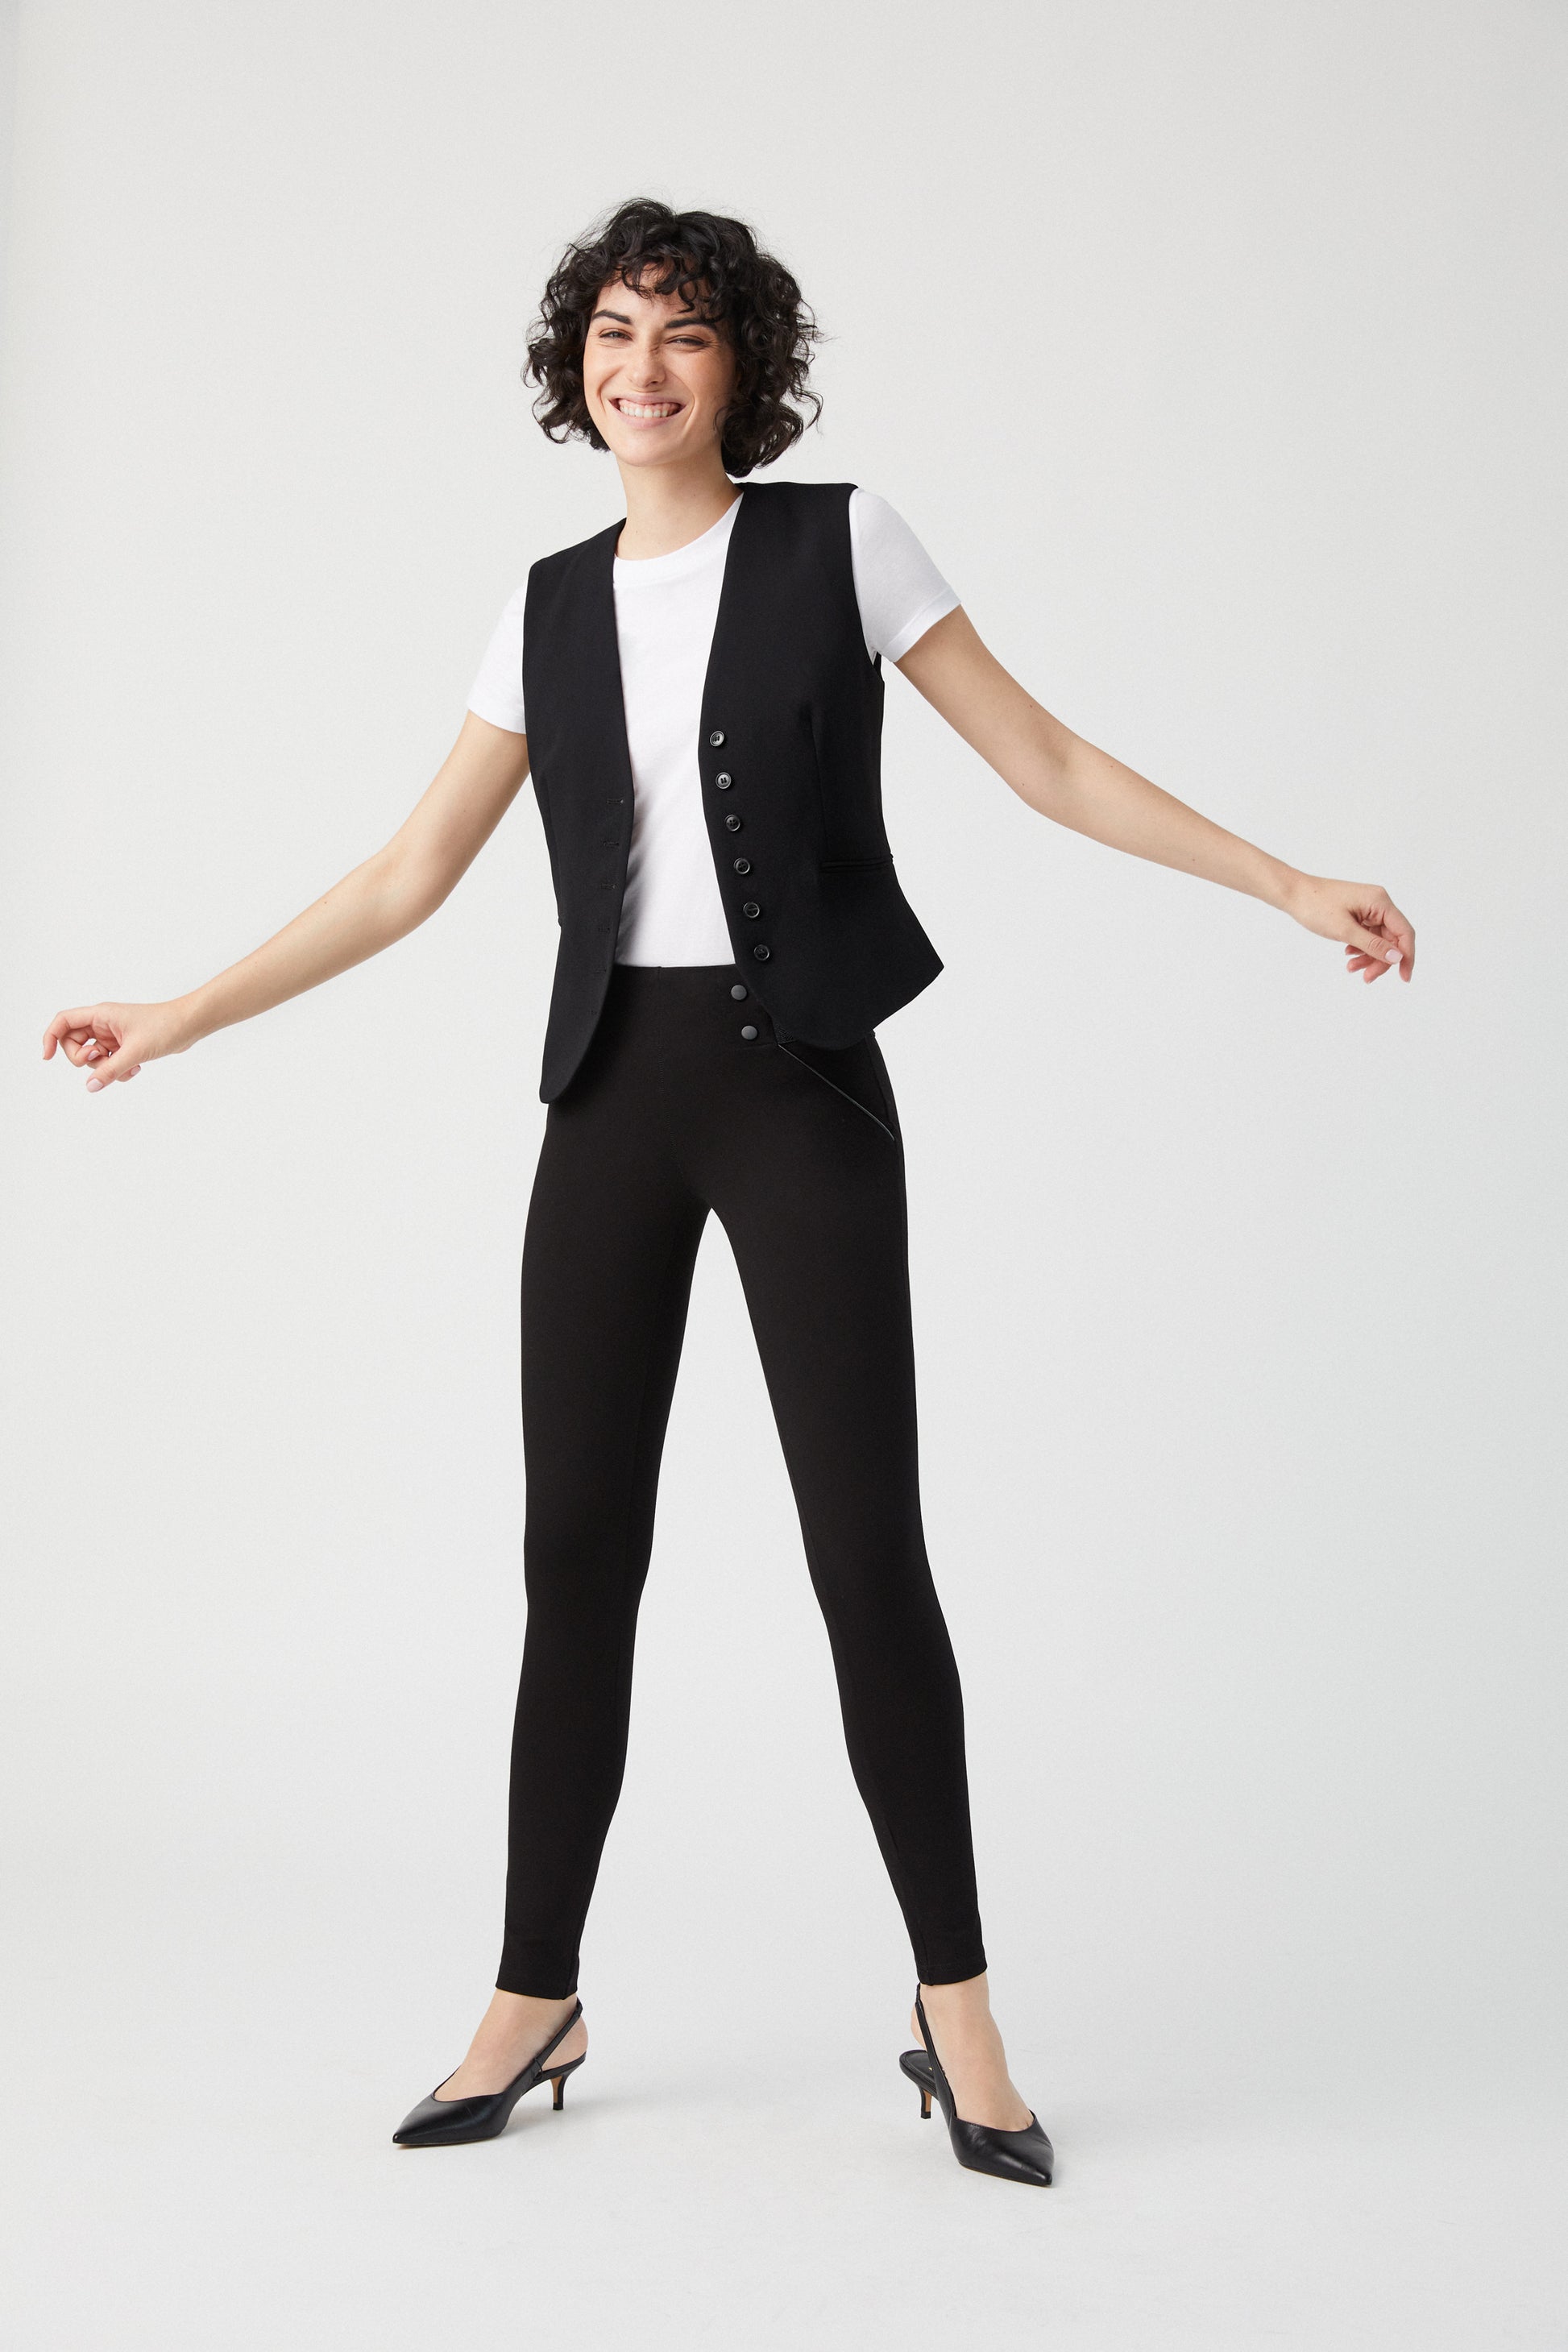 Ysabel Mora 70271 Leggings - High waisted trouser leggings with black faux buttons on the sides and deep ribbed textured elasticated slimming waistband.